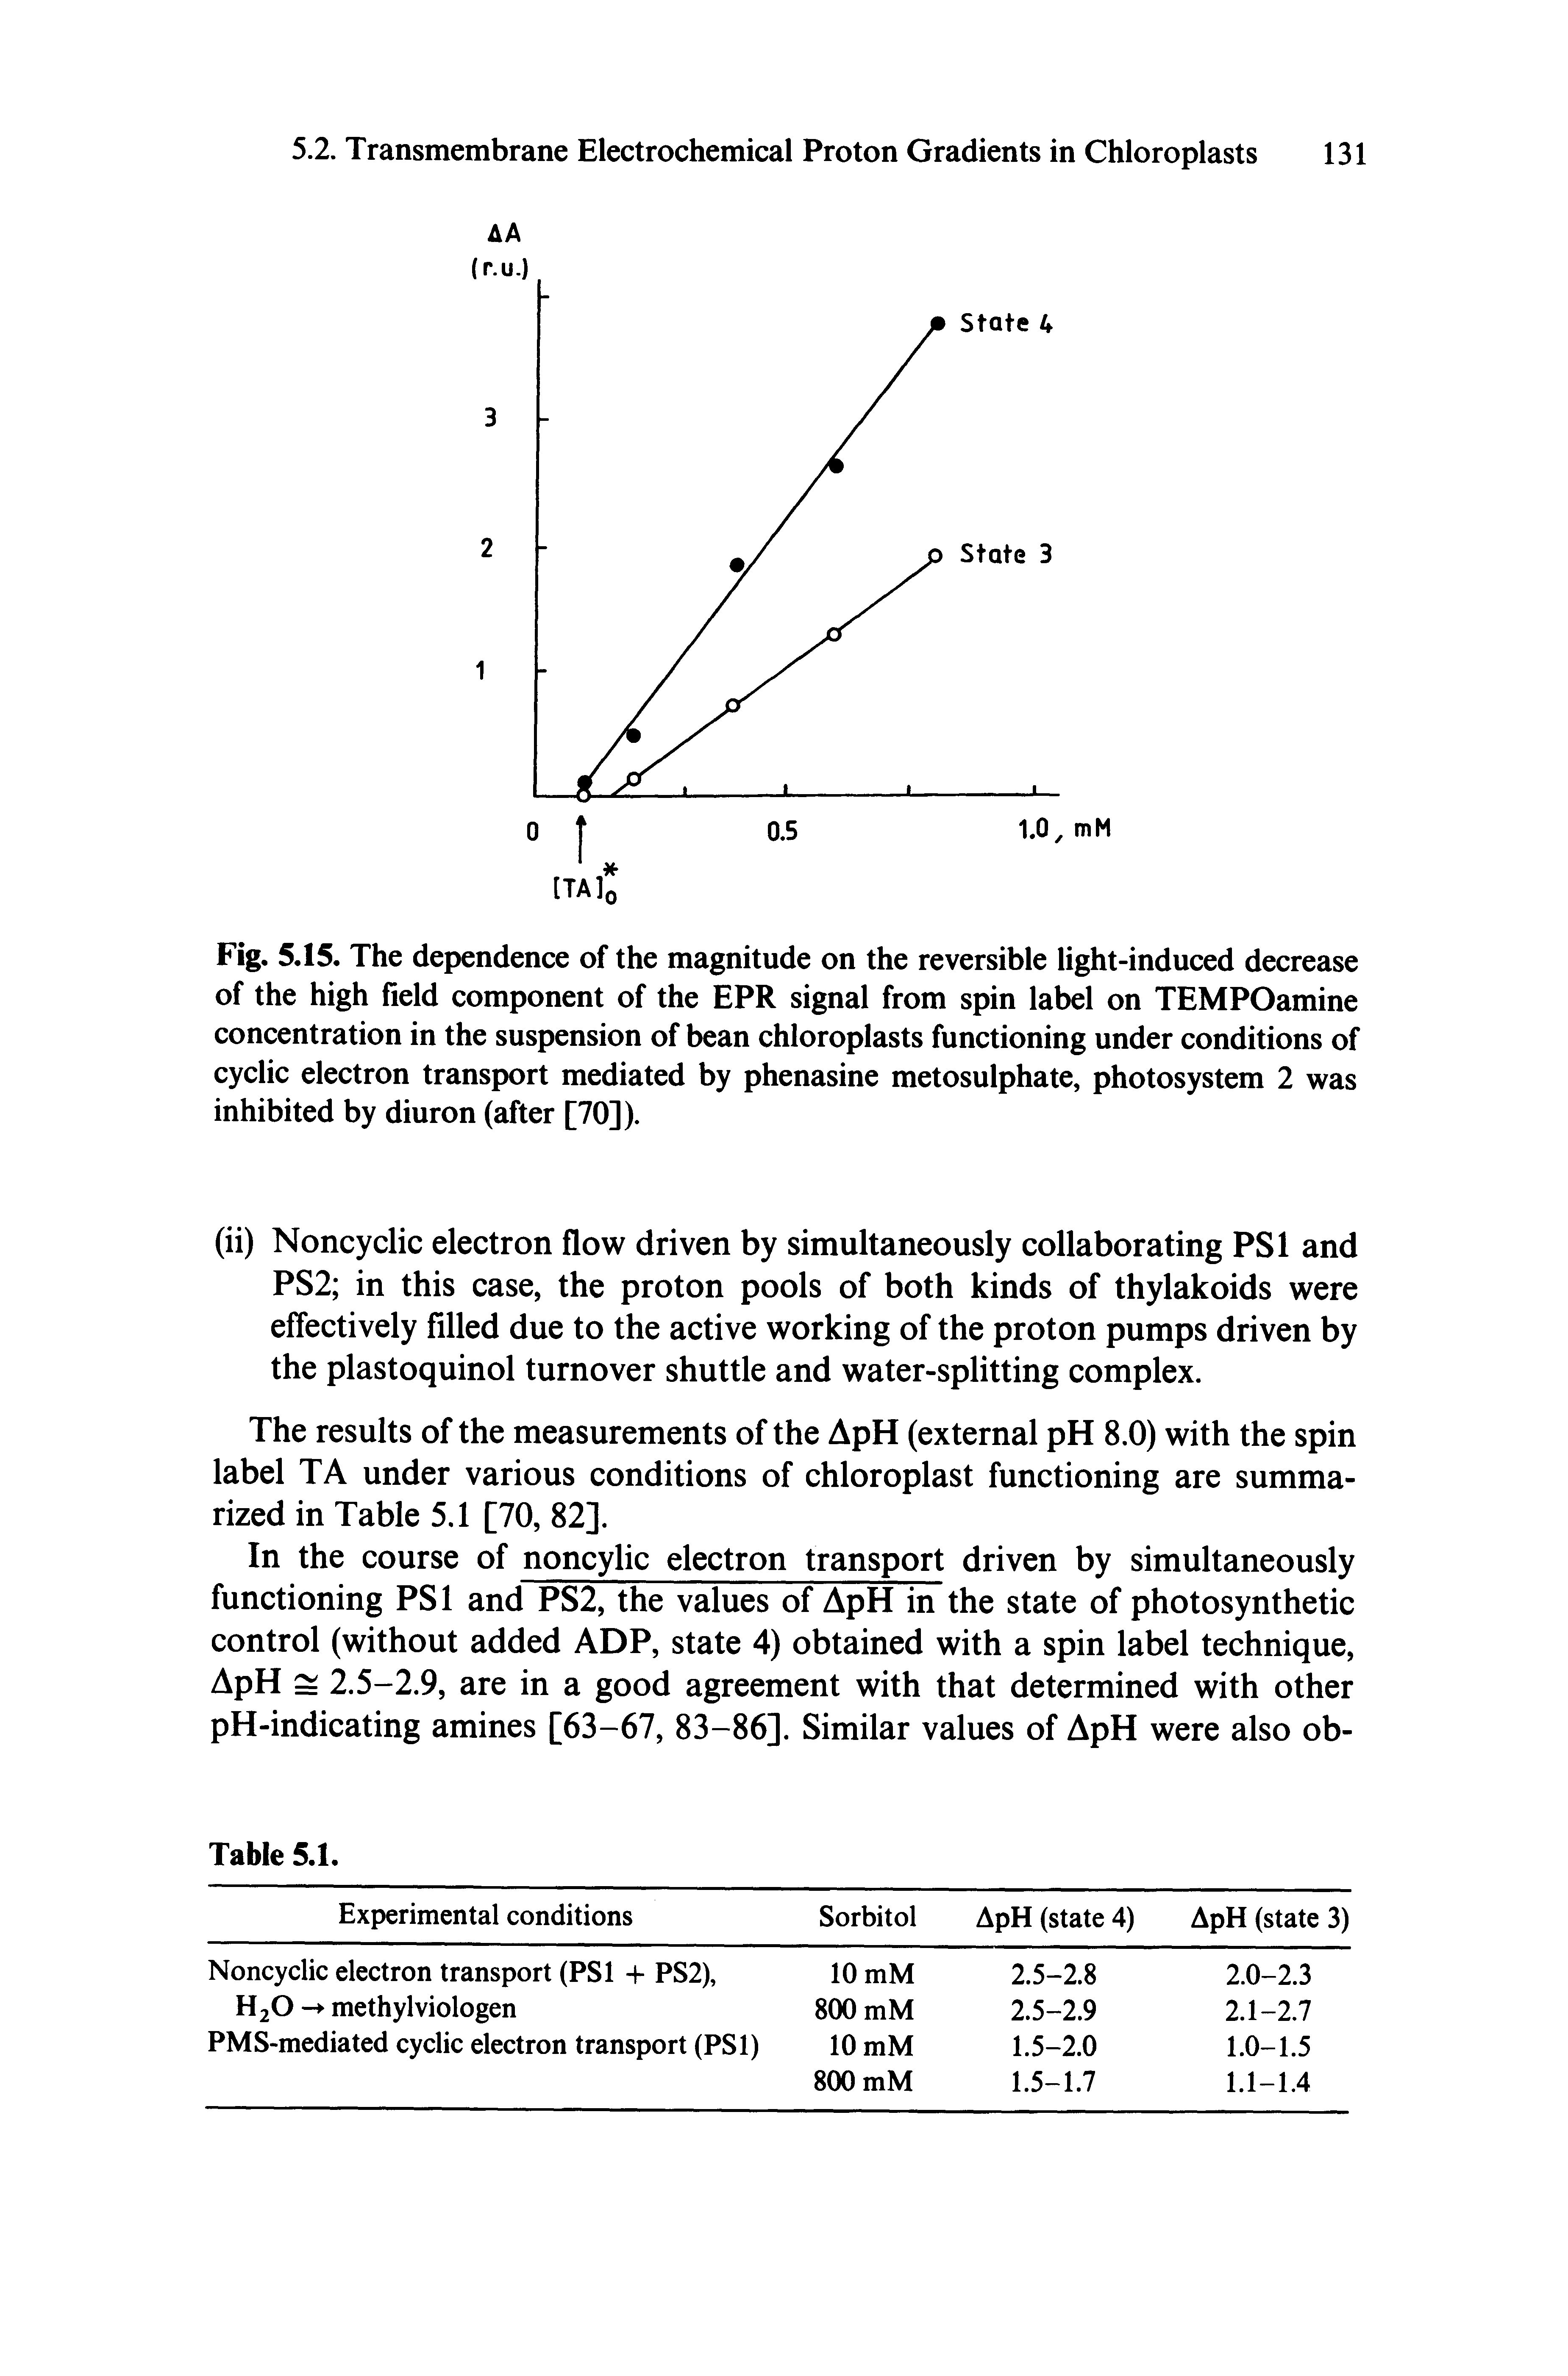 Fig. 5.15. The dependence of the magnitude on the reversible light-induced decrease of the high field component of the EPR signal from spin label on TEMPOamine concentration in the suspension of bean chloroplasts functioning under conditions of cyclic electron transport mediated by phenasine metosulphate, photosystem 2 was inhibited by diuron (after [70]).